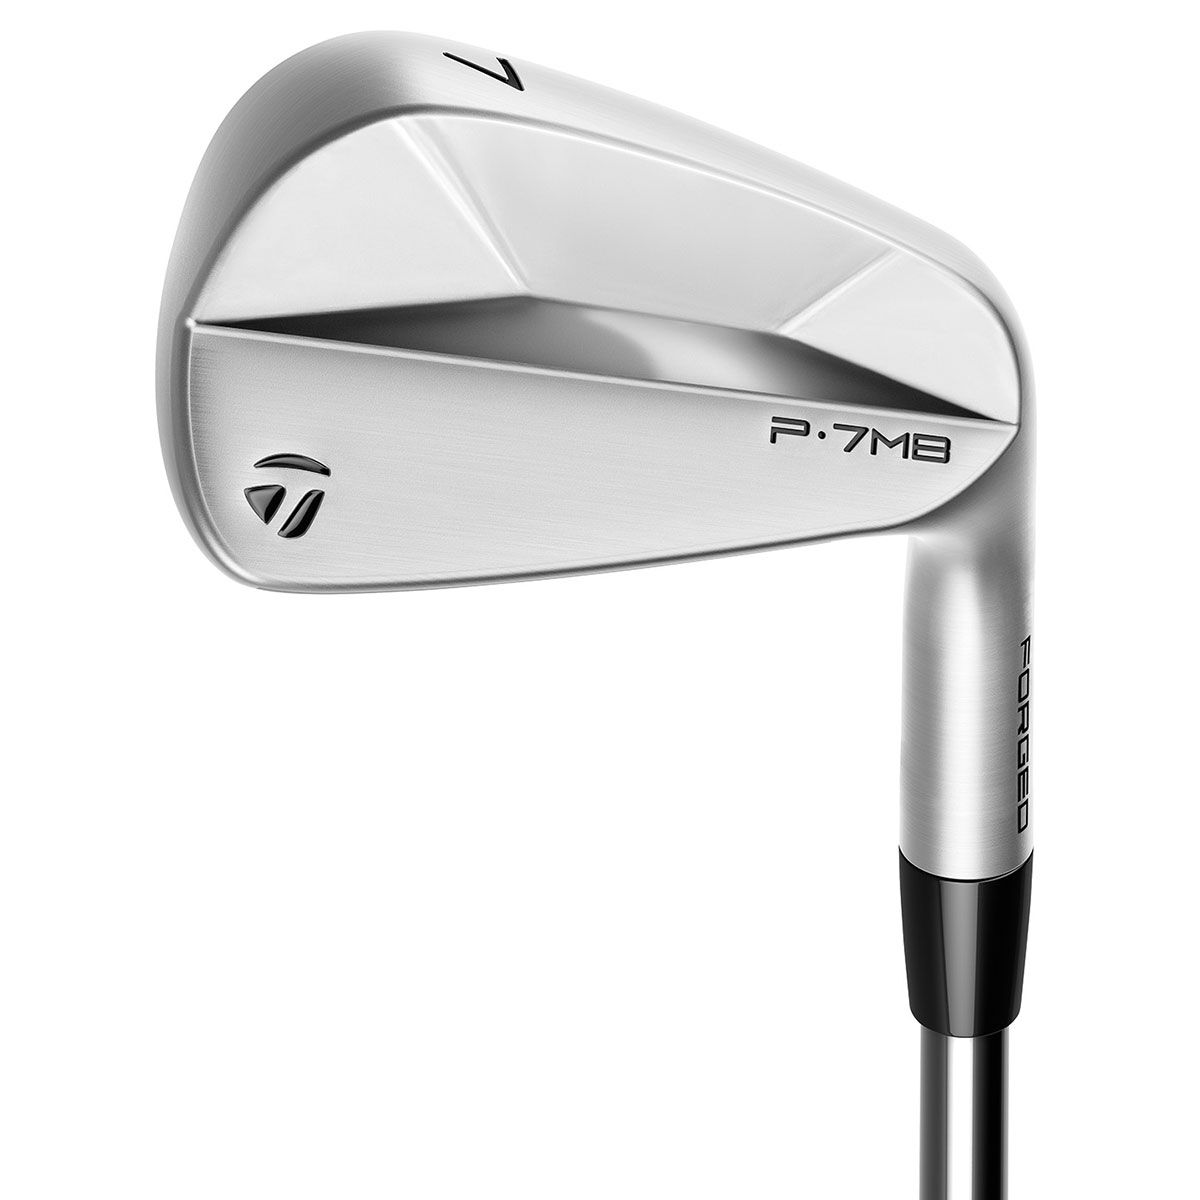 TaylorMade P7MB Steel Golf Irons - Custom Fit, Male | American Golf von TaylorMade